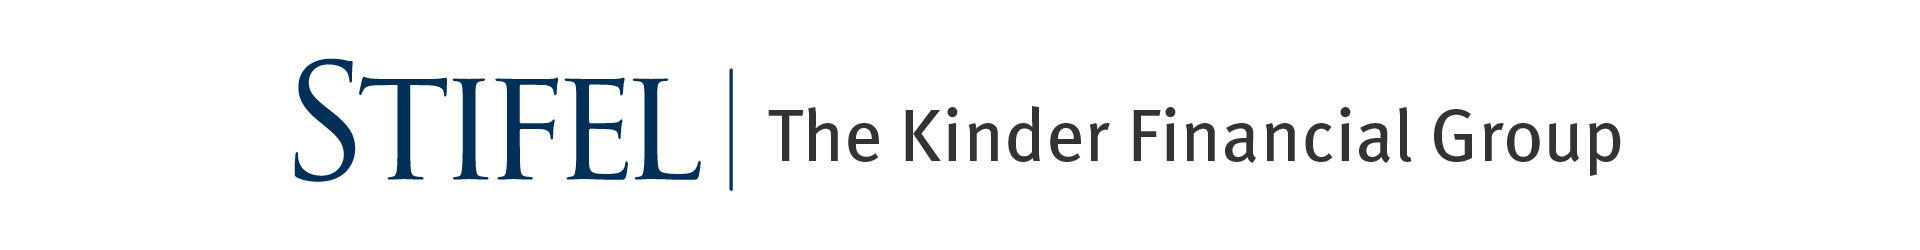 The Kinder Financial Group